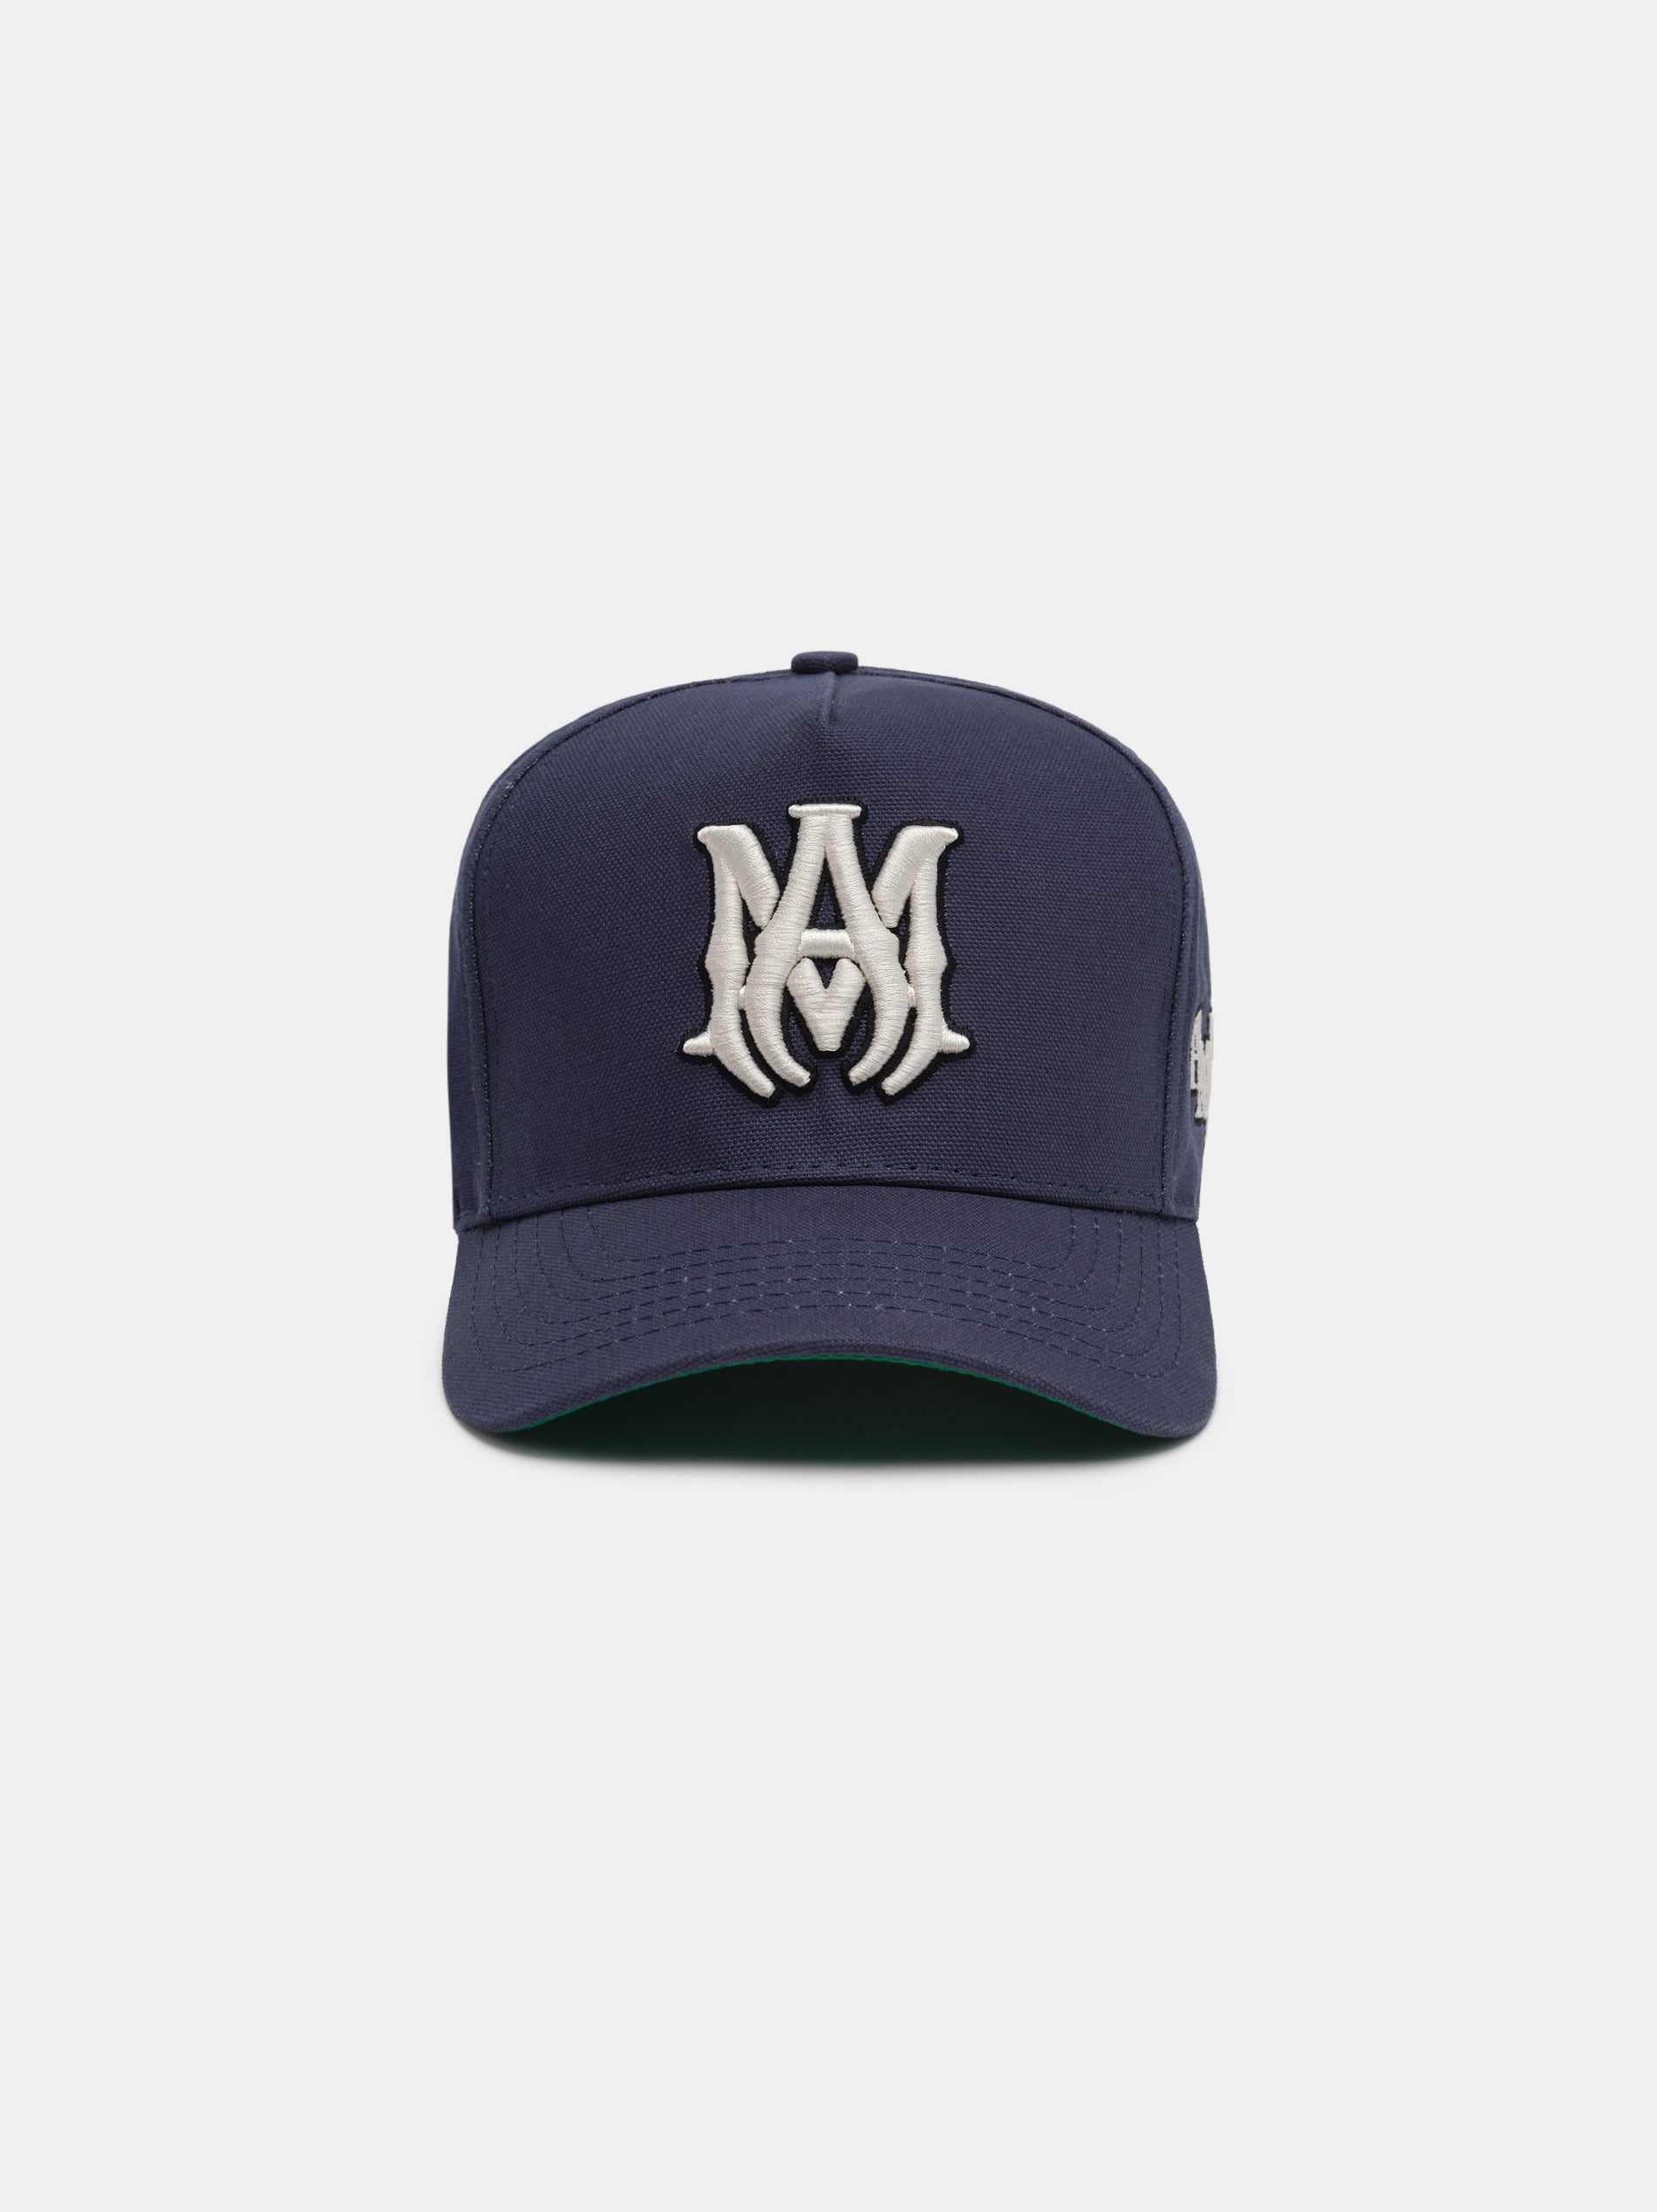 Product MA STAGGERED AMIRI FULL CANVAS HAT - Navy Off White featured image